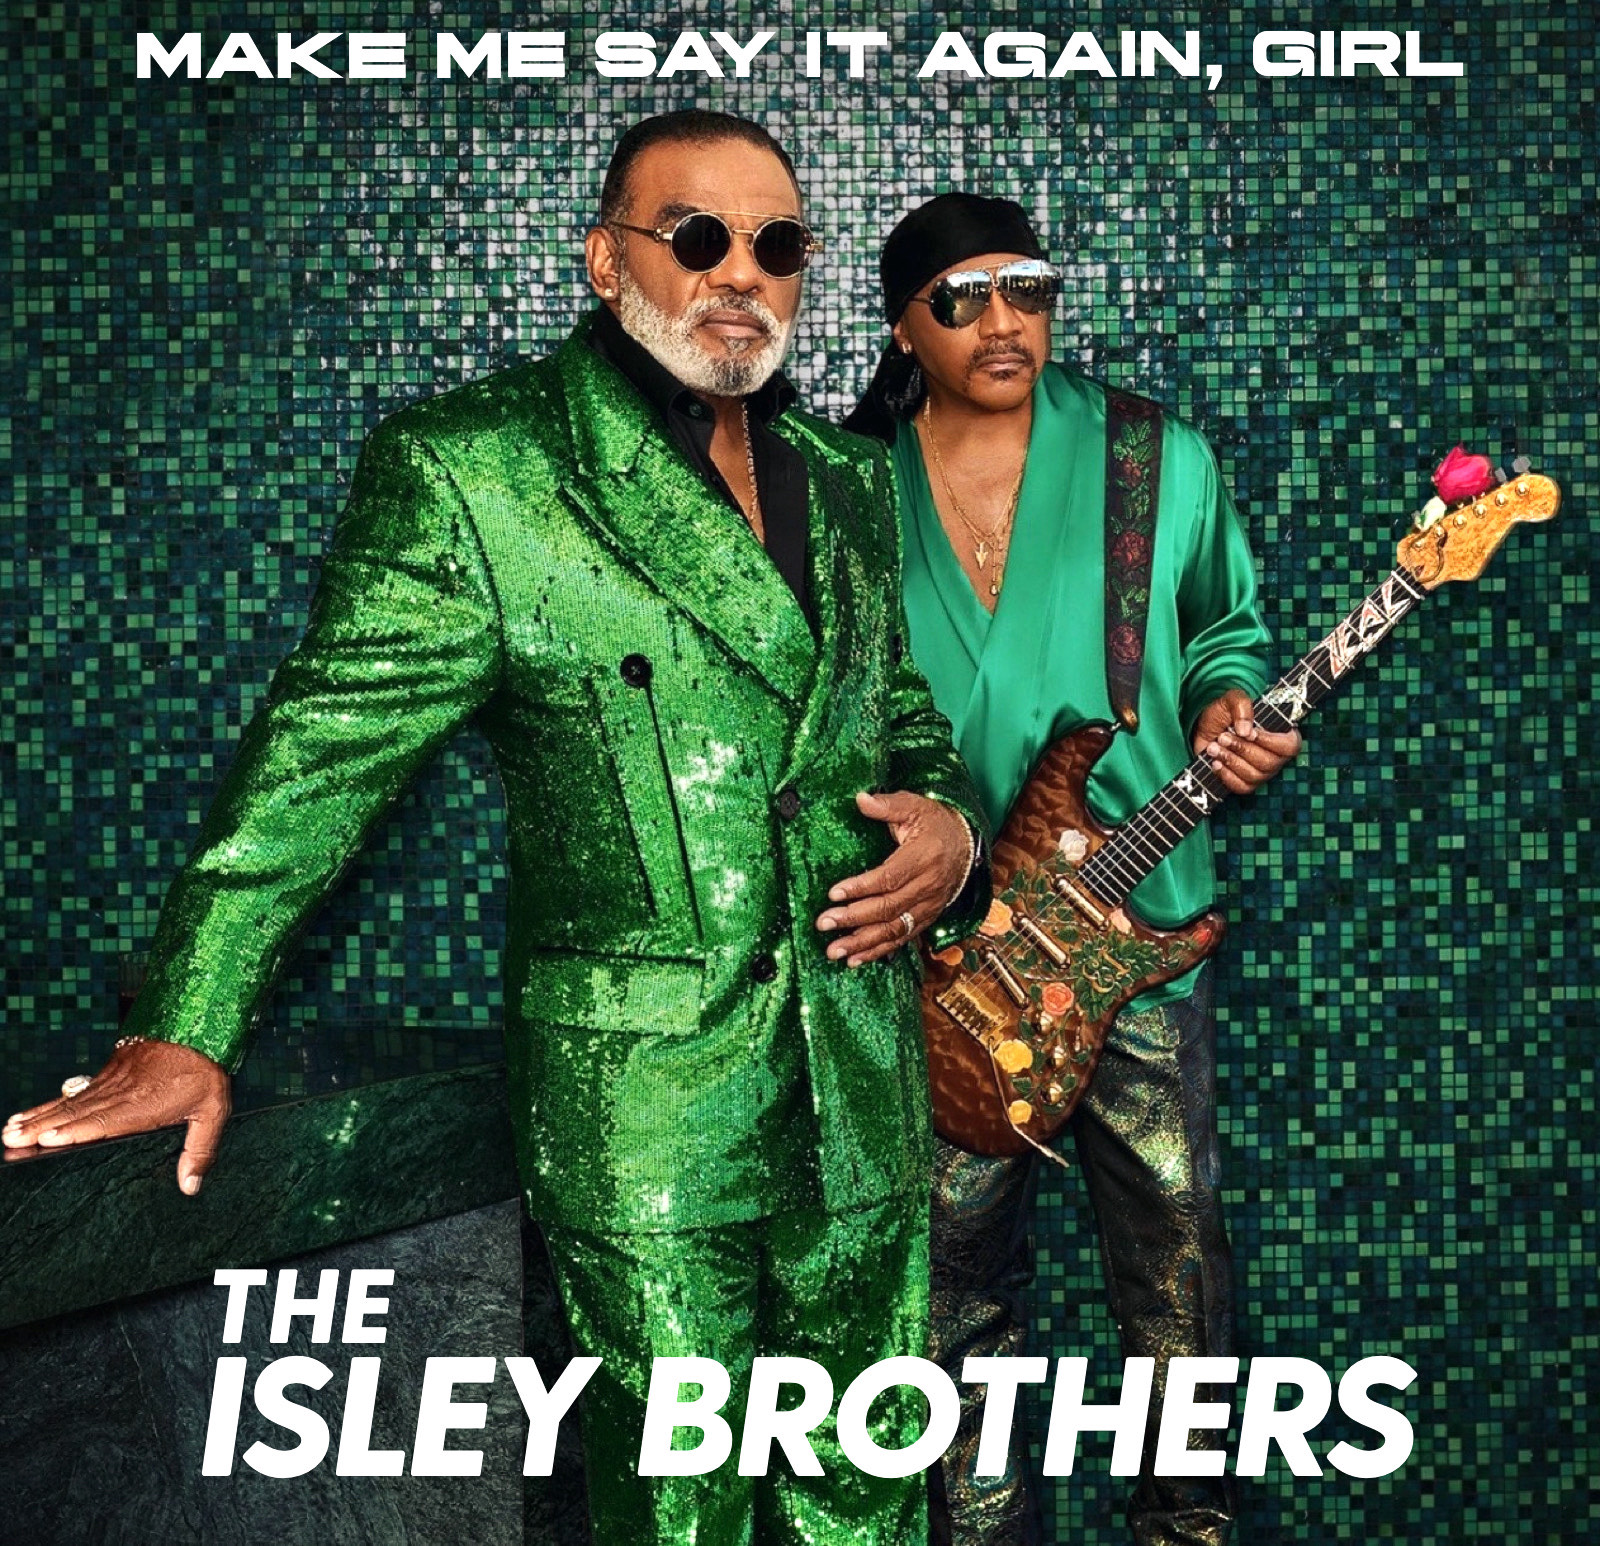 The Isley Brothers Announce New Single "Last Time"